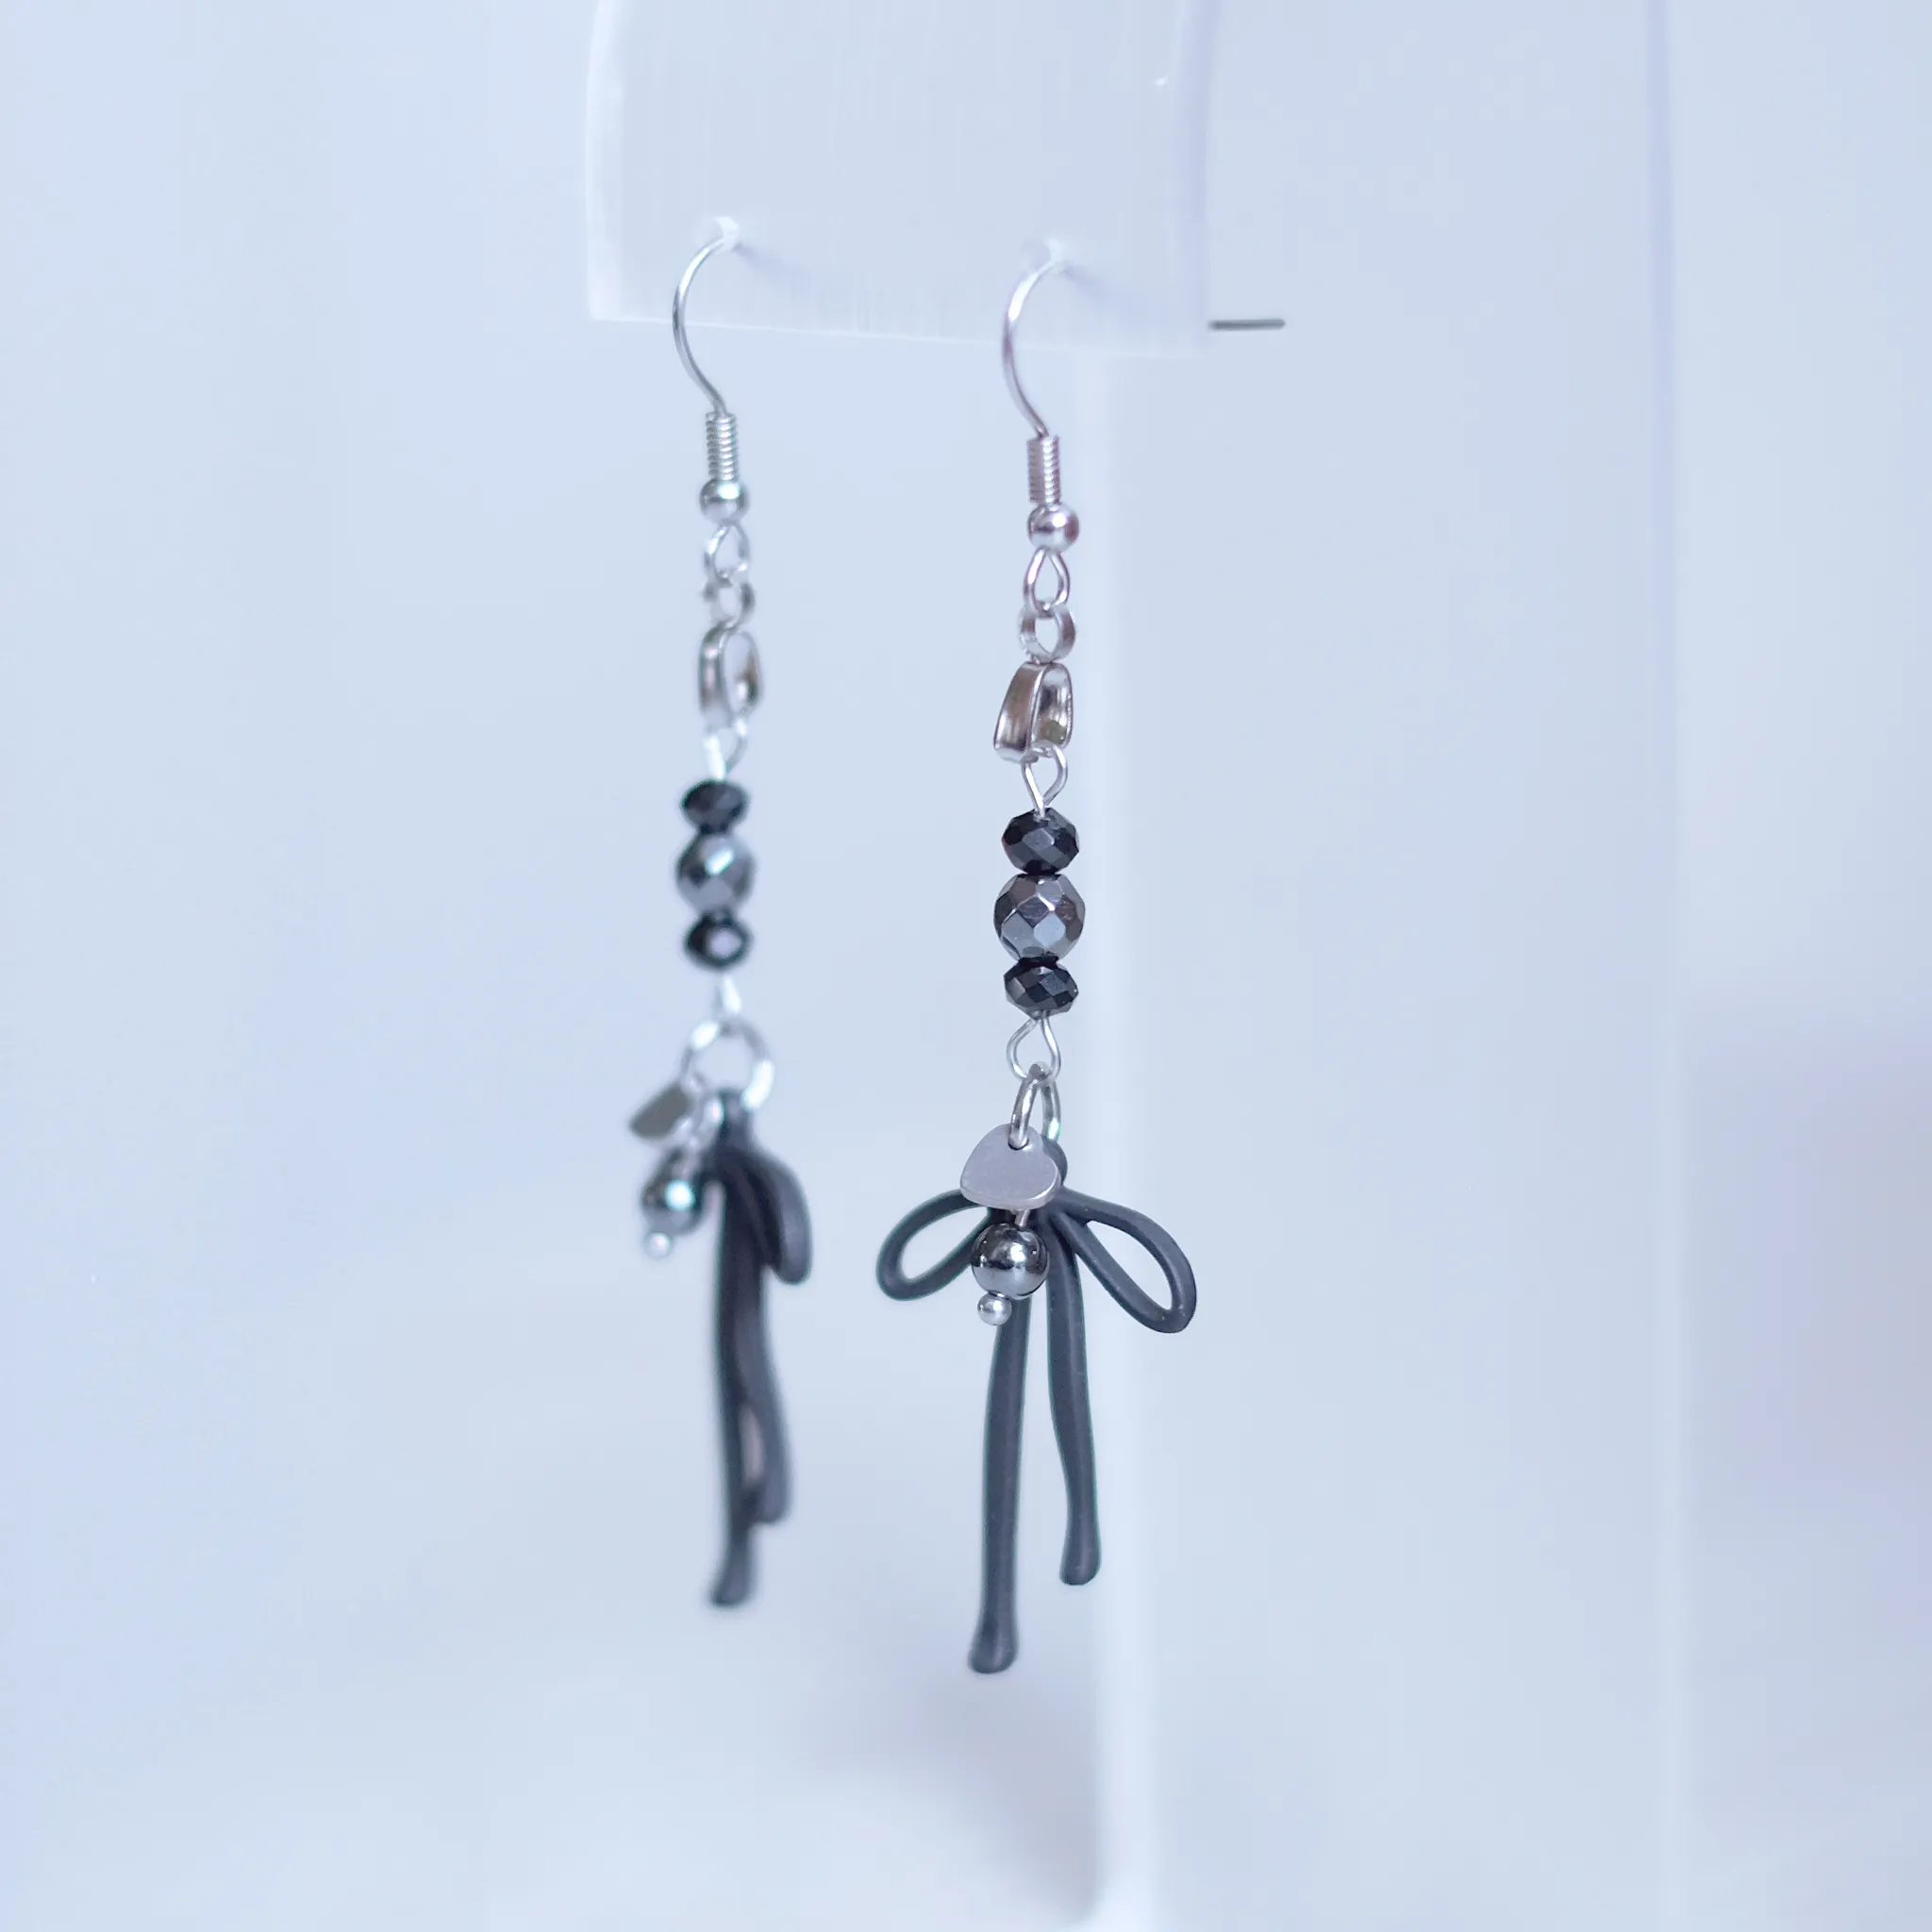 Black Coquettes earrings